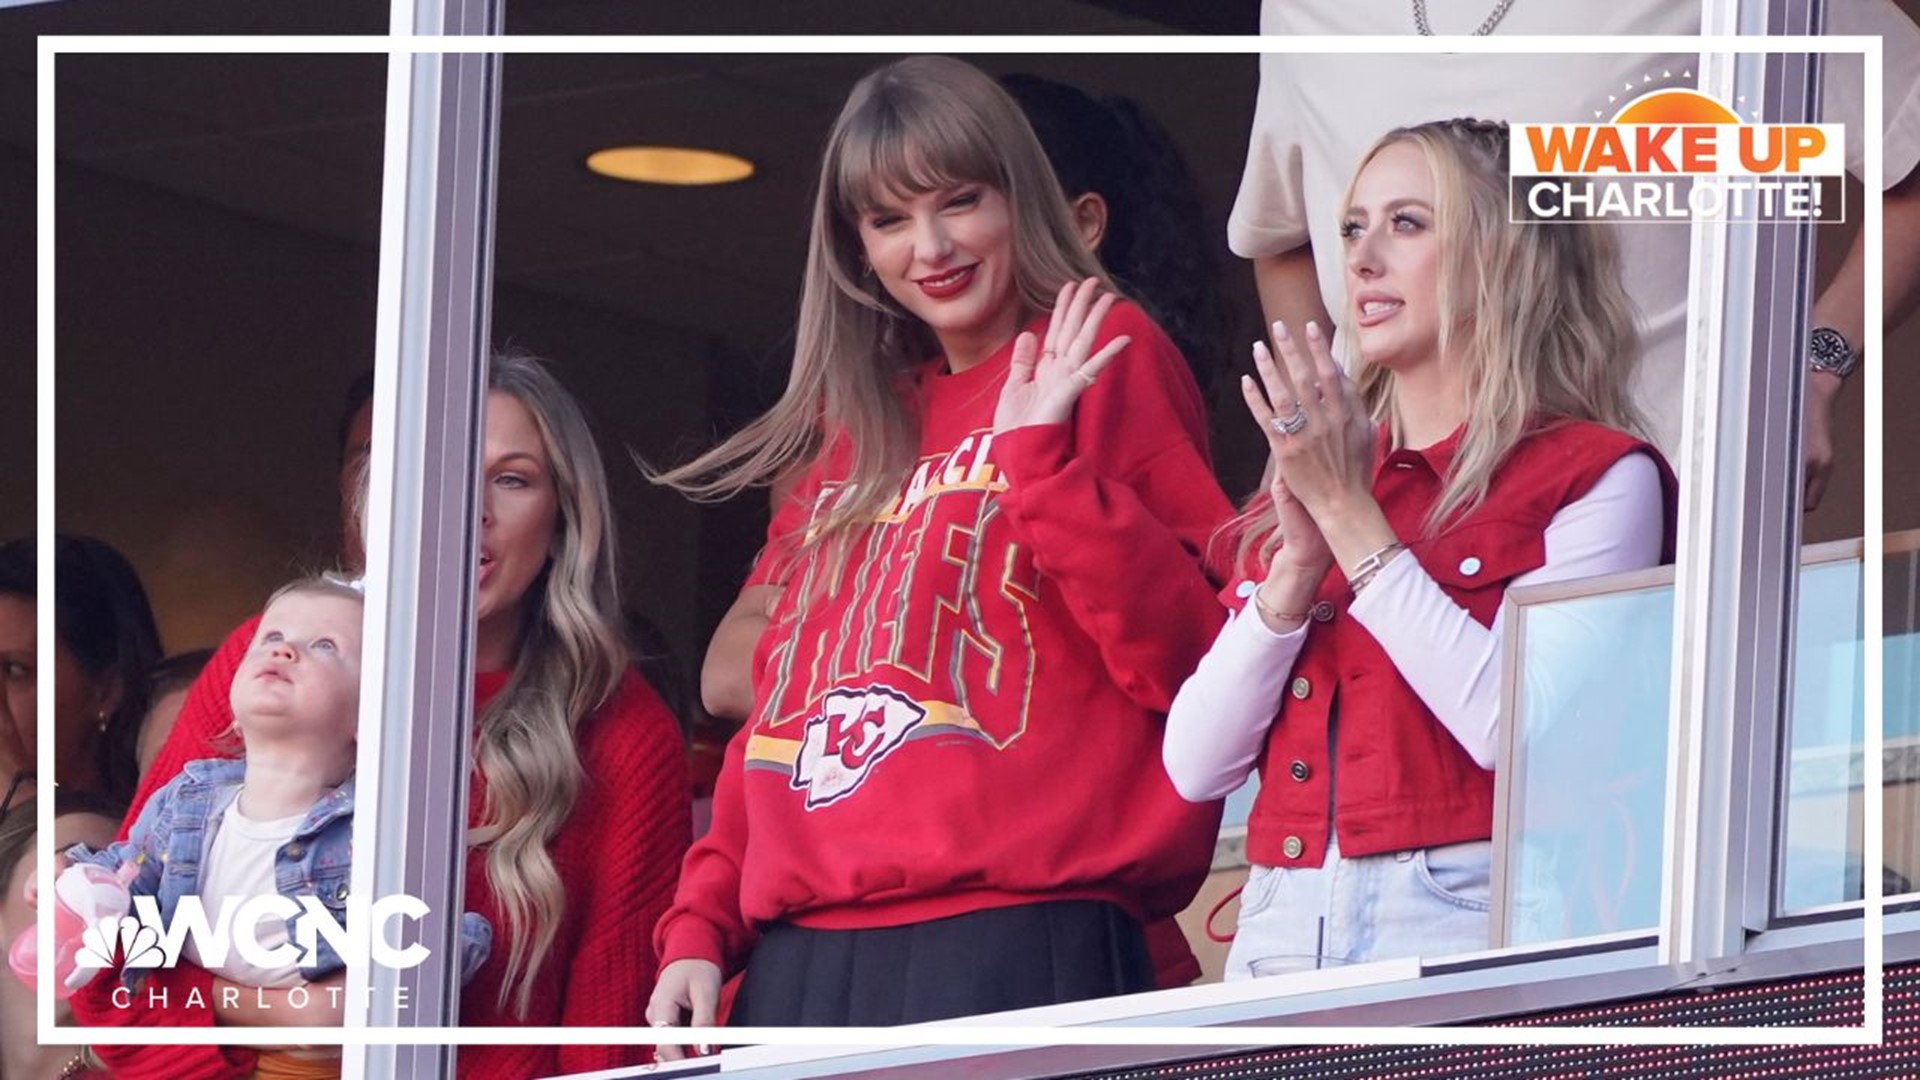 Taylor Swift wouldn't let Fox play her music during Chiefs game